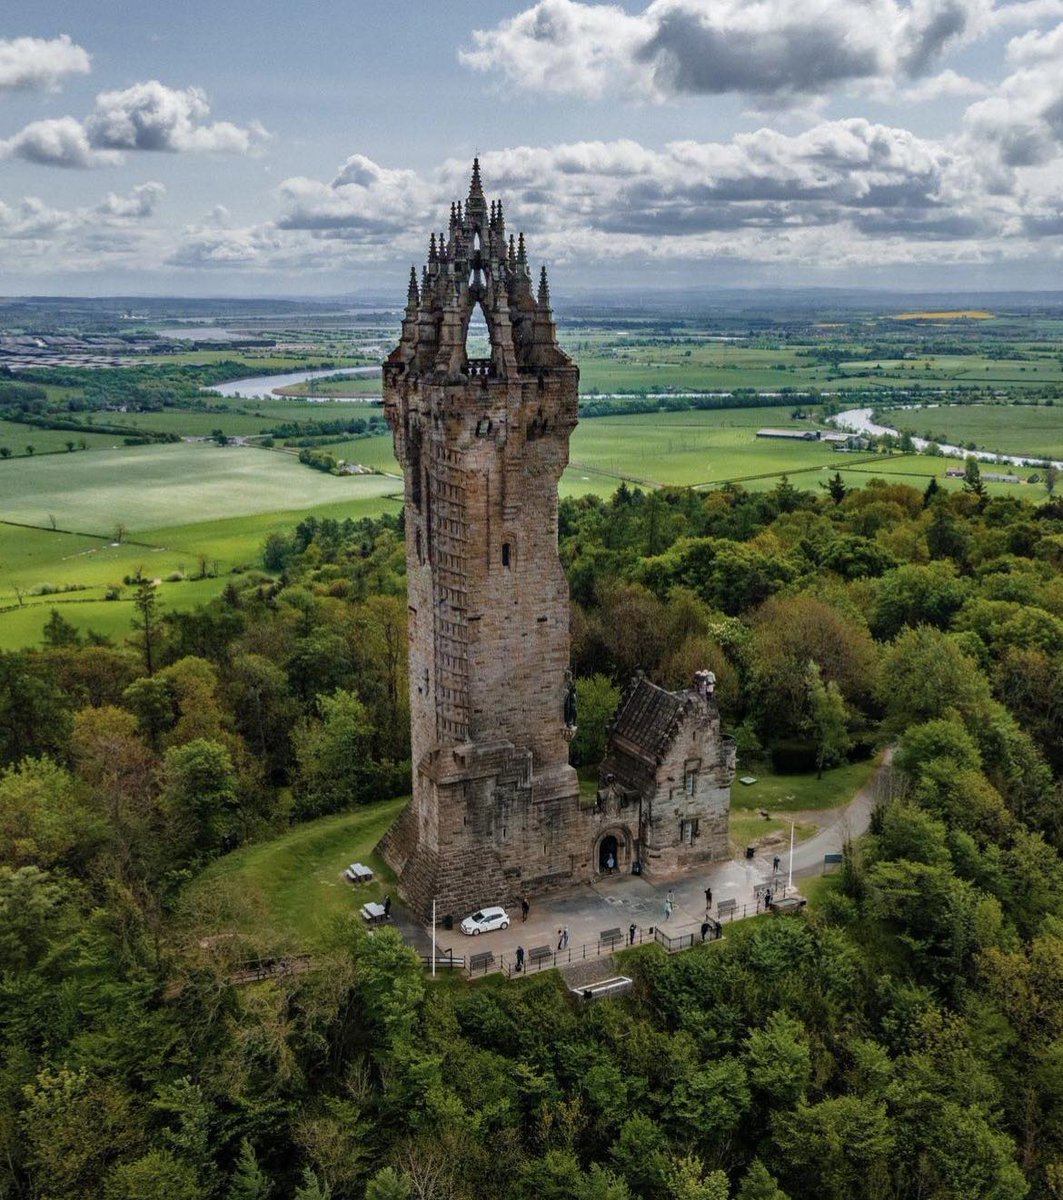 The National Wallace Monument, built to commemorate Scottish patriot and martyr Sir William Wallace, stands out as one of the most distinctive landmarks on the Stirling skyline 🏴󠁧󠁢󠁳󠁣󠁴󠁿. IG/christopherfunk_ #VisitScotland